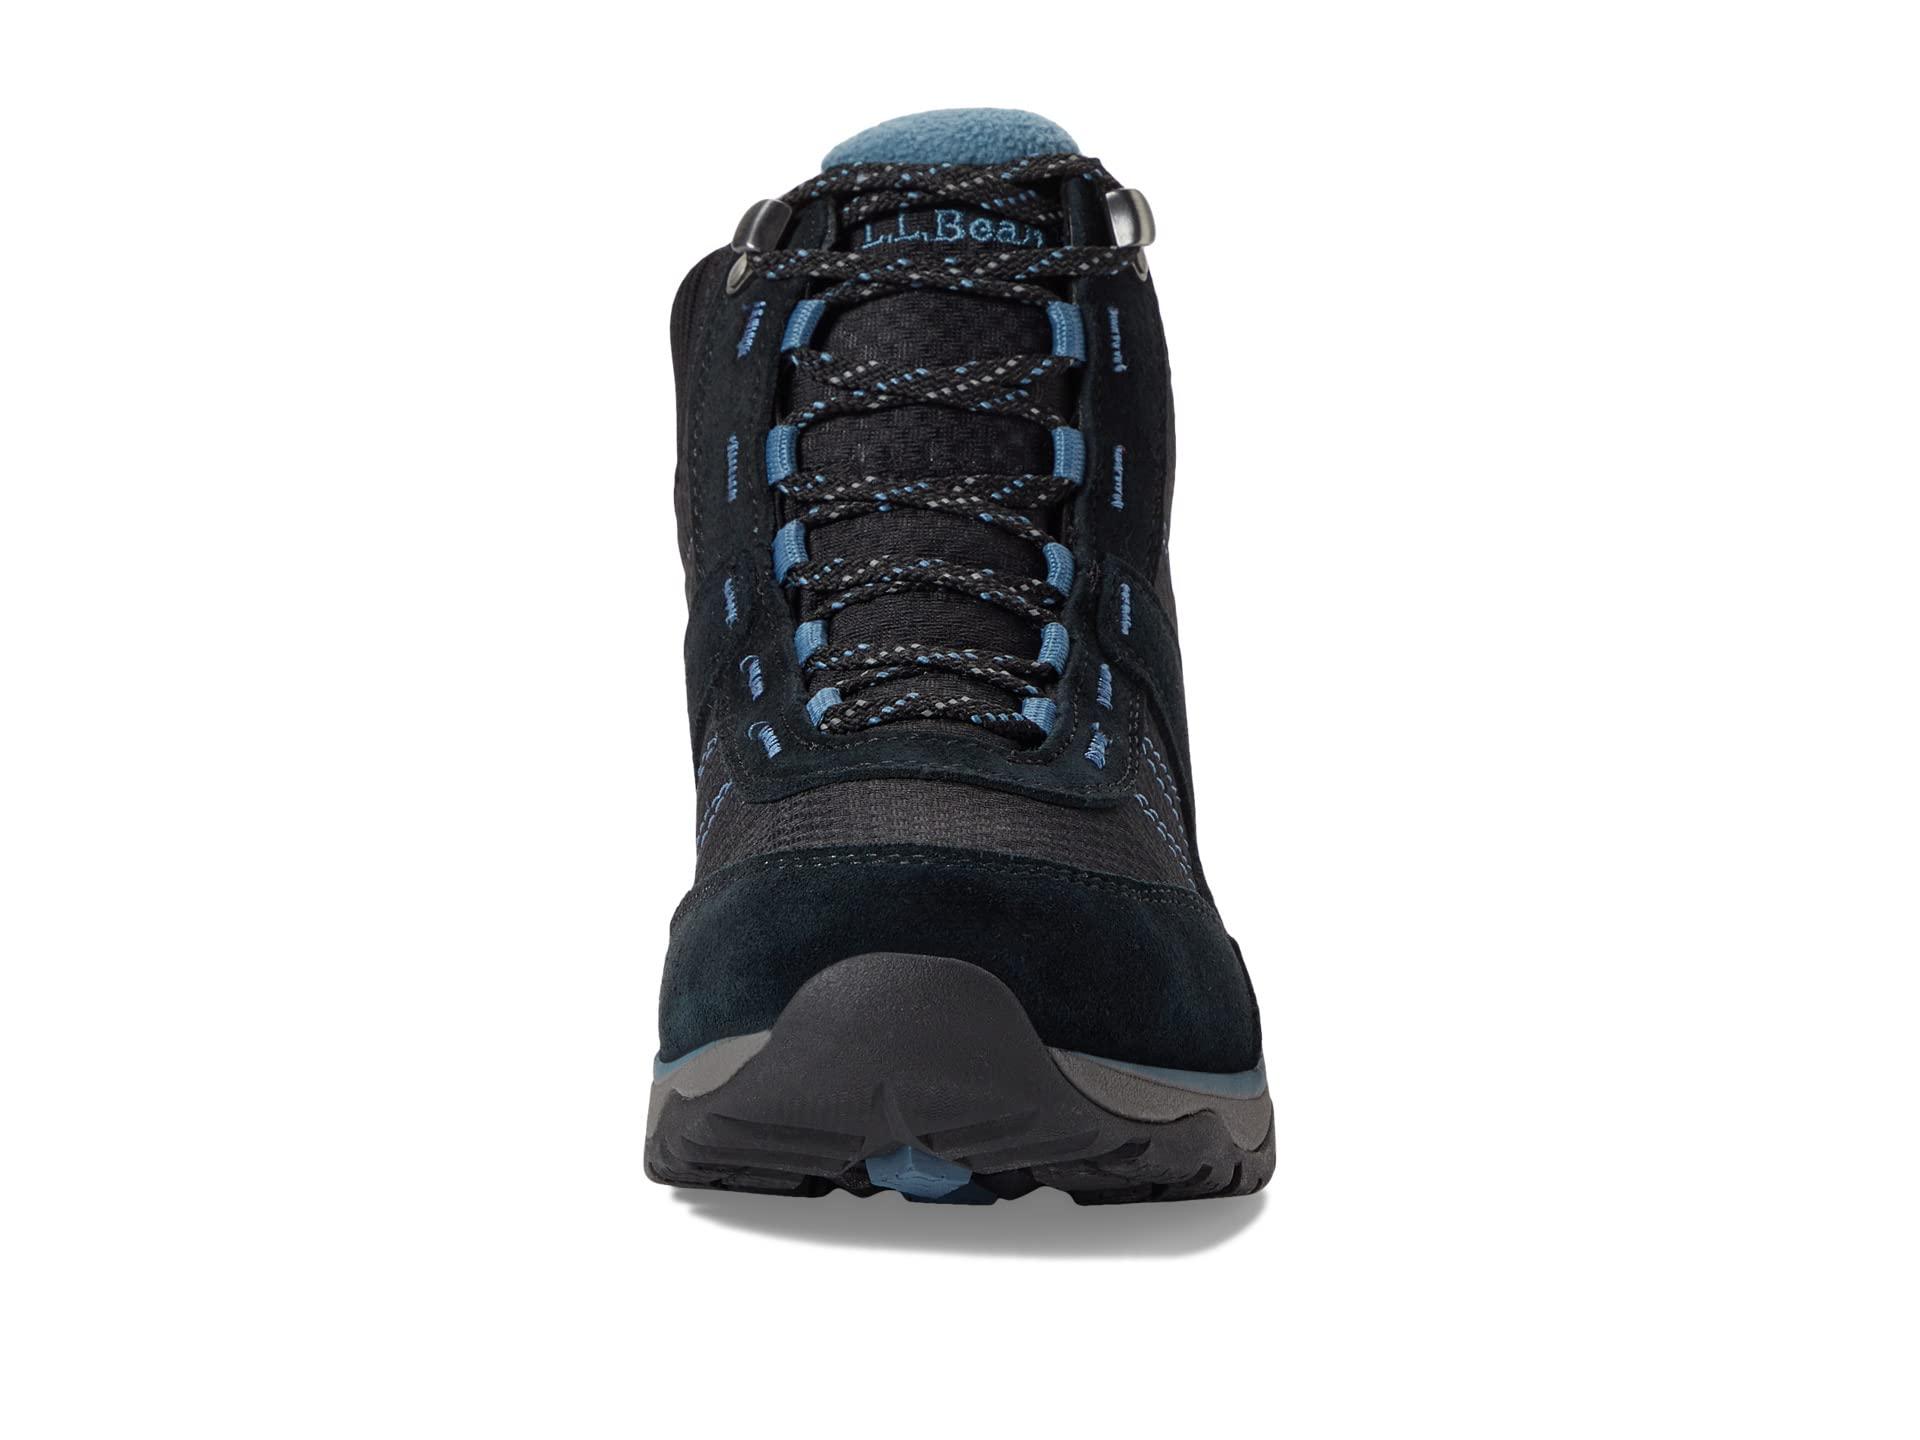 L.L. Bean Snow Sneaker 5 Mid Boot Waterproof Insulated Lace-up in Black |  Lyst